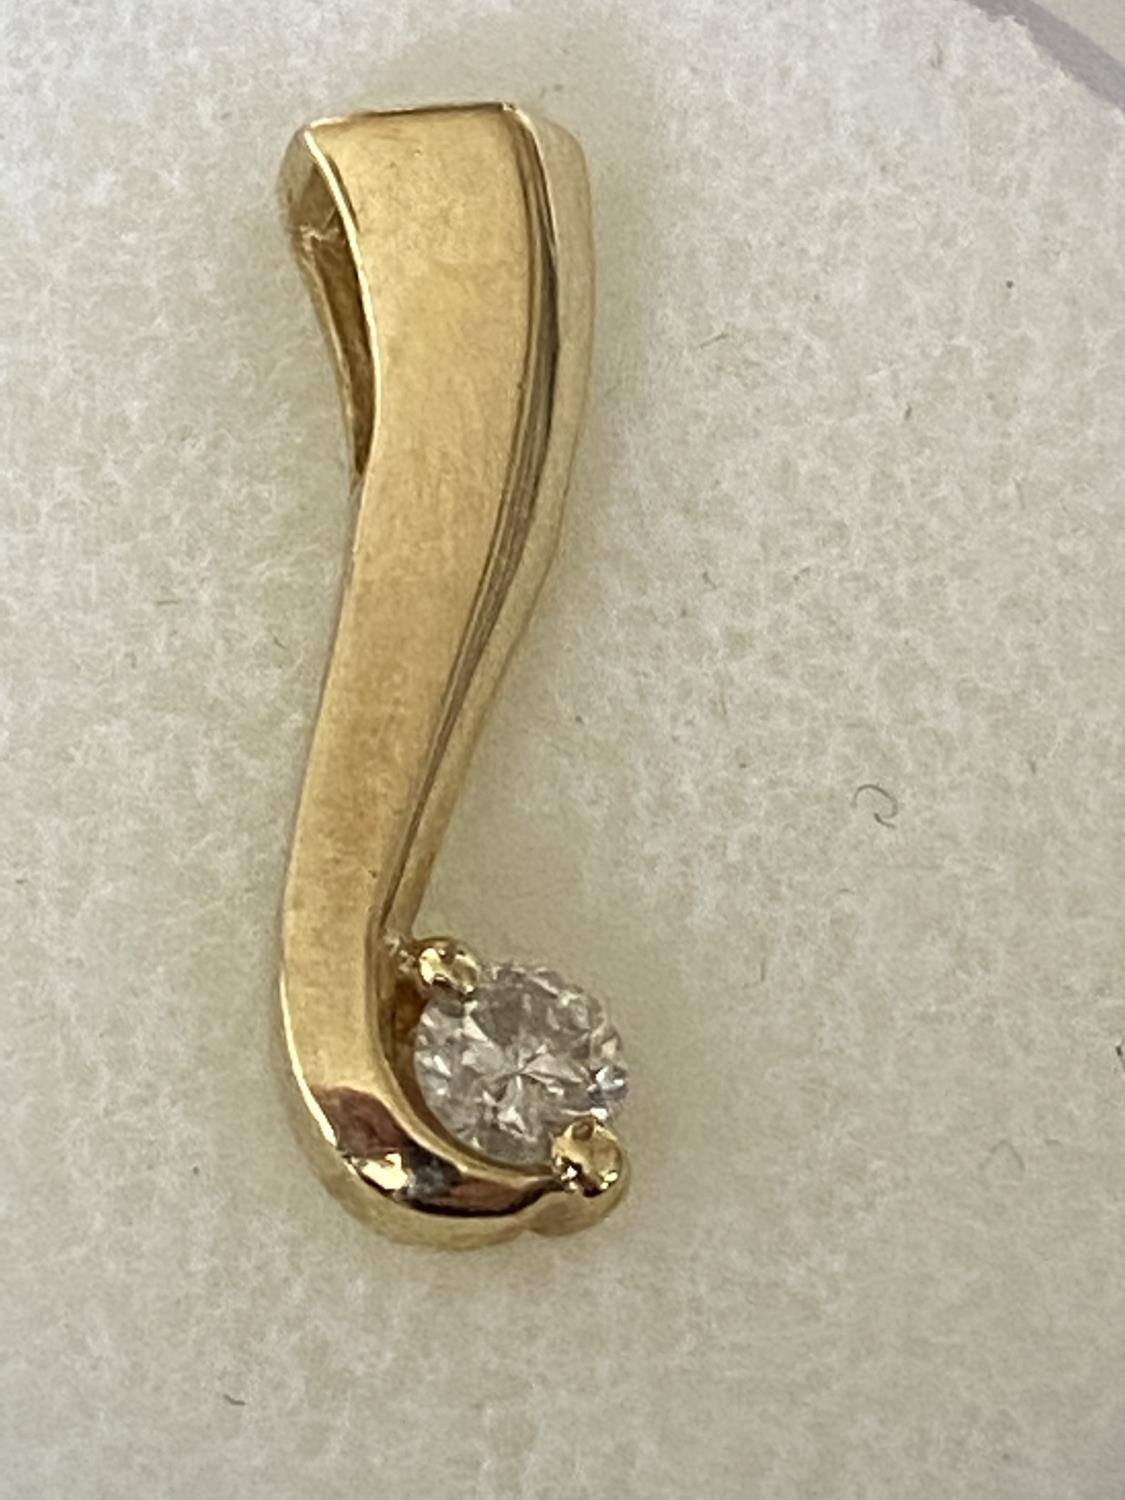 A 9 CARAT YELLOW GOLD PENDANT WITH 0.18 CARAT ROUND CUT DIAMOND. WEIGHT 1.2 GRAMS. WITH GIE